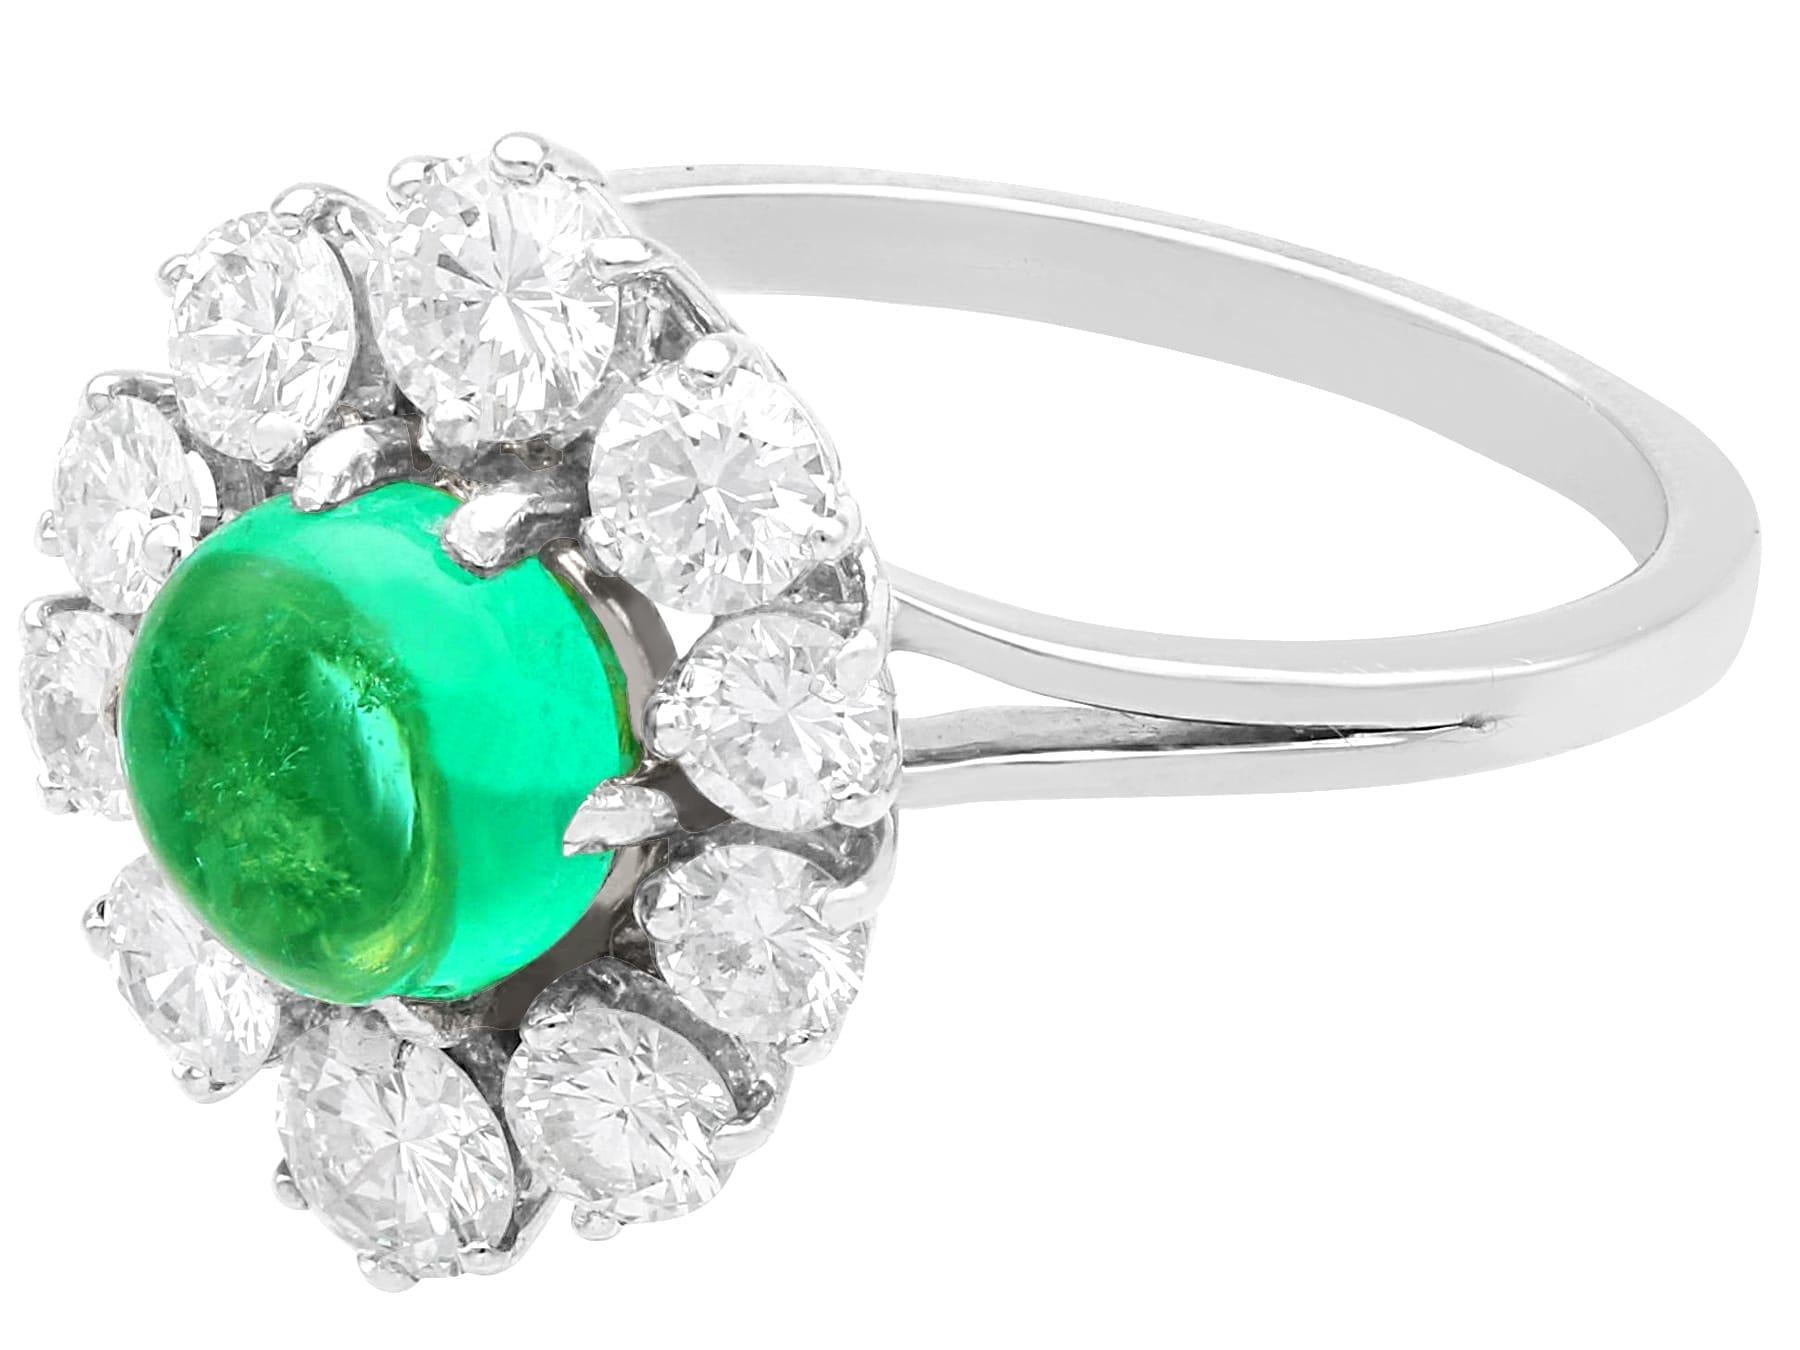 Vintage French 1.50ct Emerald & 2.40ct Diamond 18k White Gold Cluster Dress Ring In Excellent Condition For Sale In Jesmond, Newcastle Upon Tyne